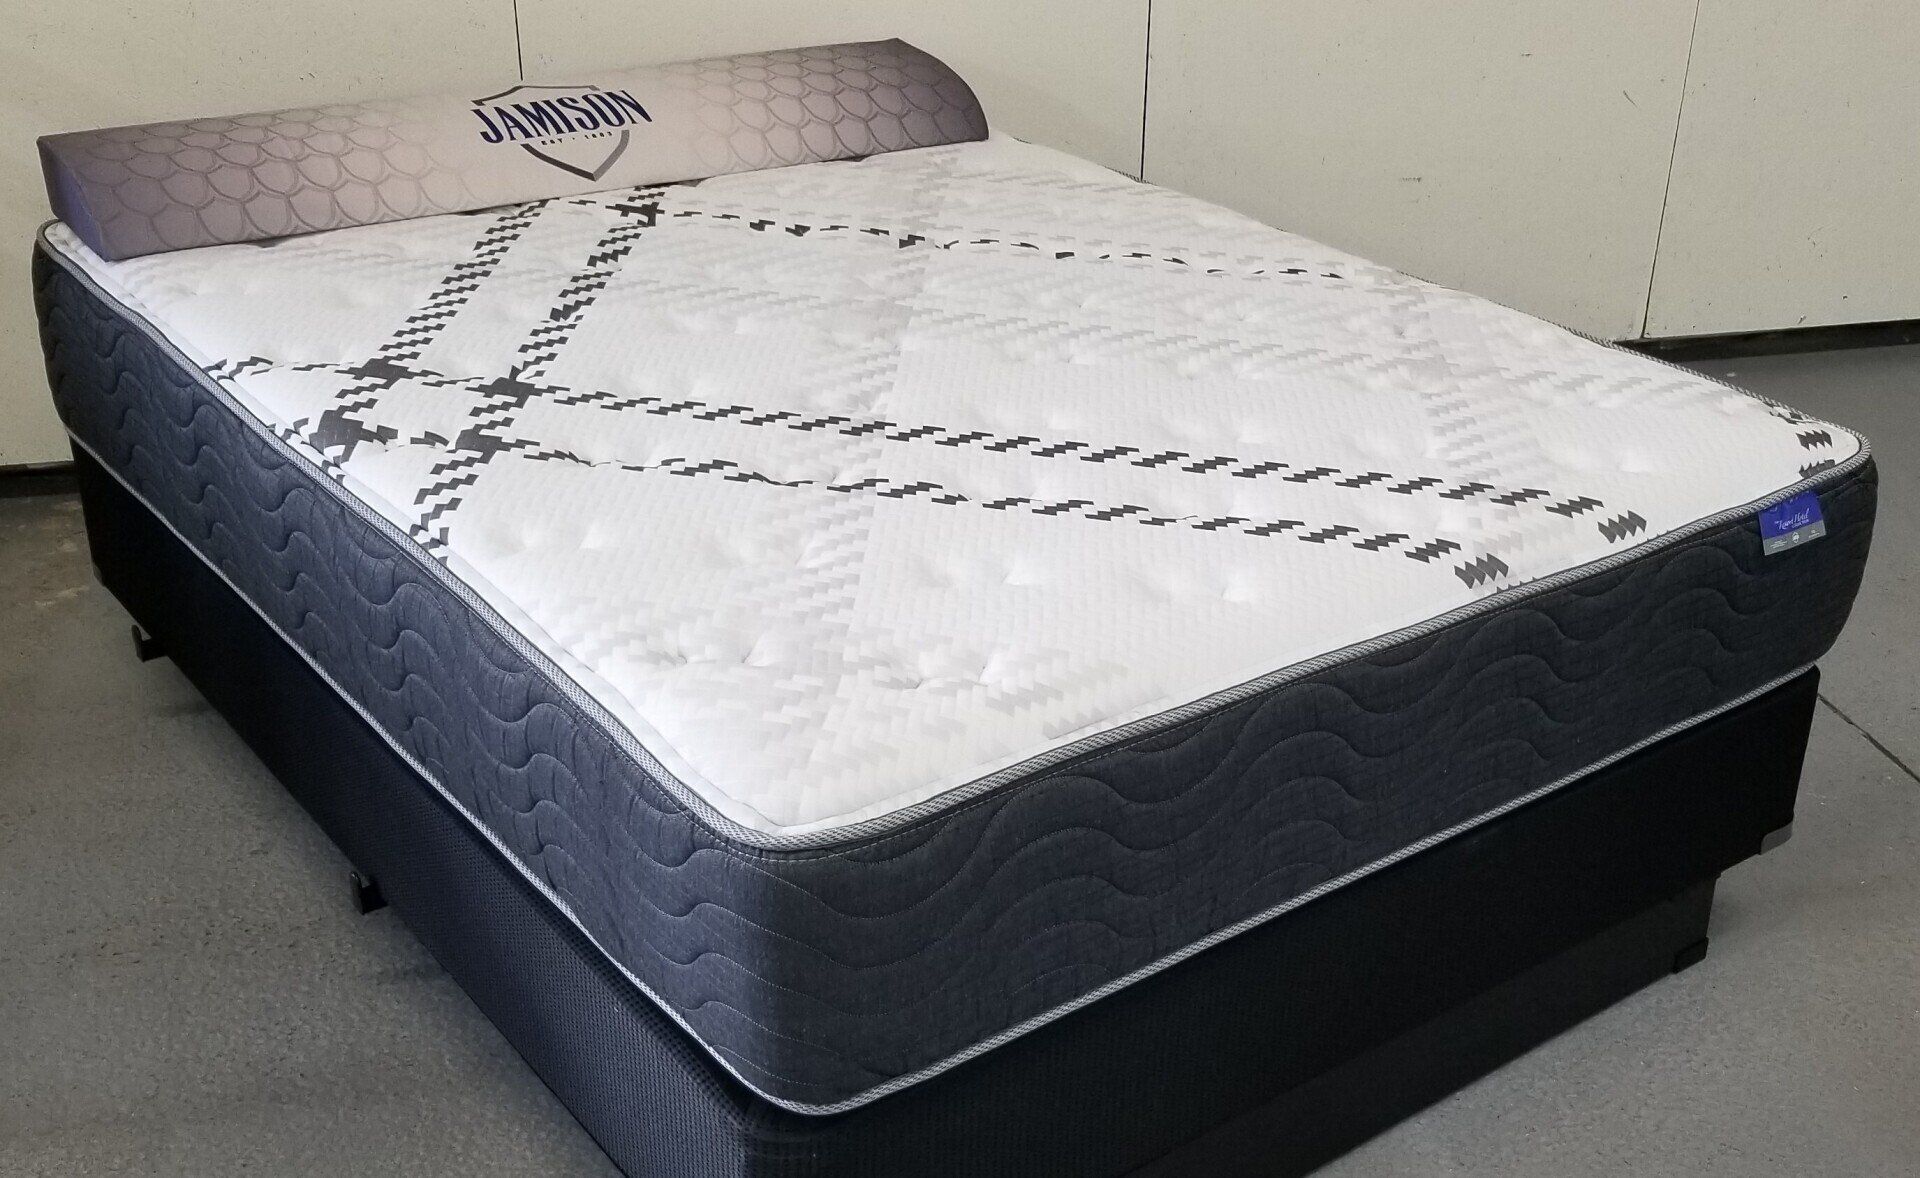 jamison firm double sided mattress